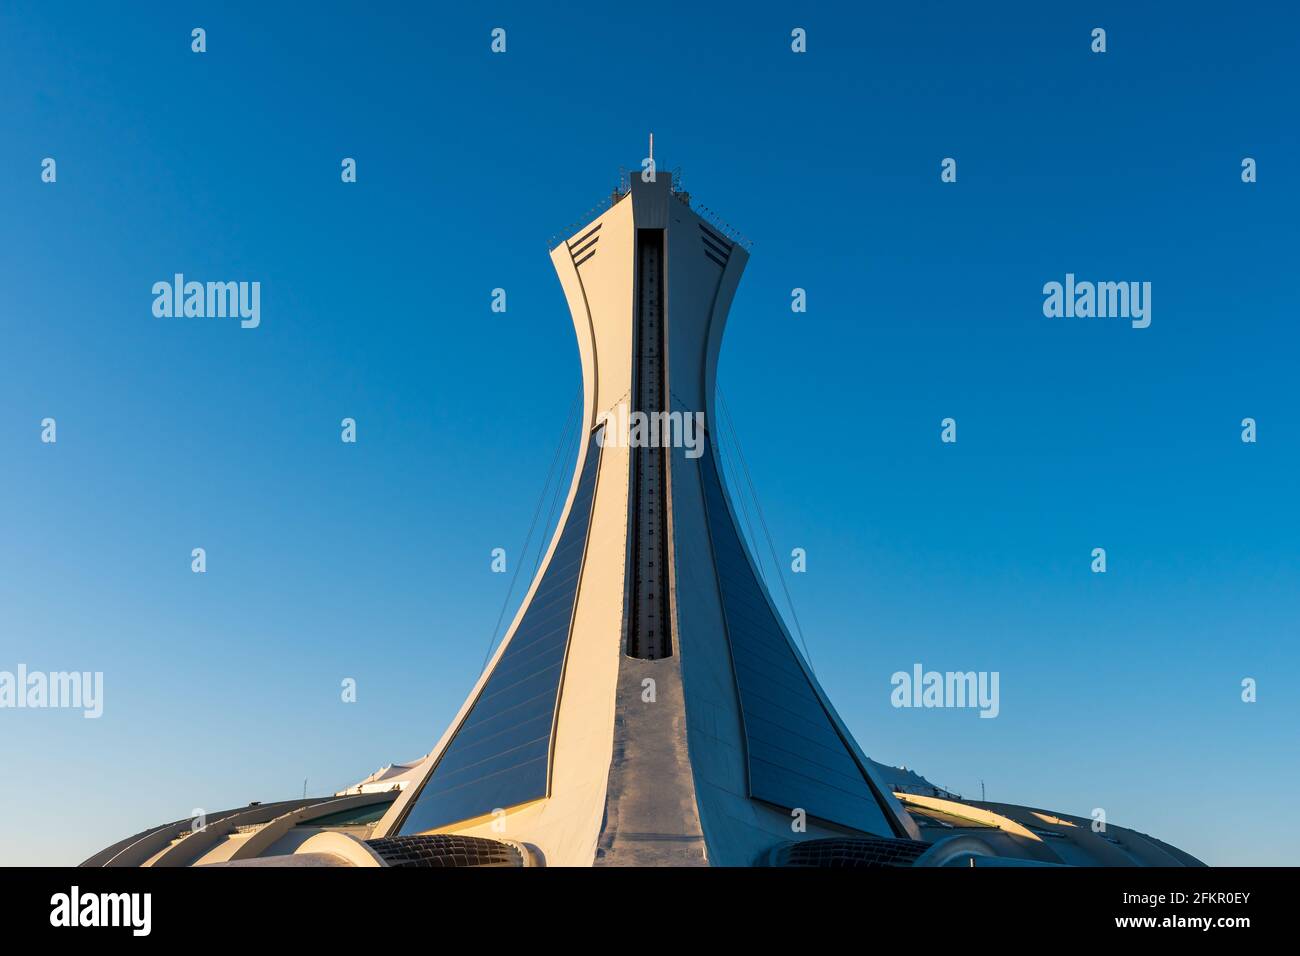 Beautiful view of the Olympic stadium located at Olympic Park in the Hochelaga-Maisonneuve district Stock Photo